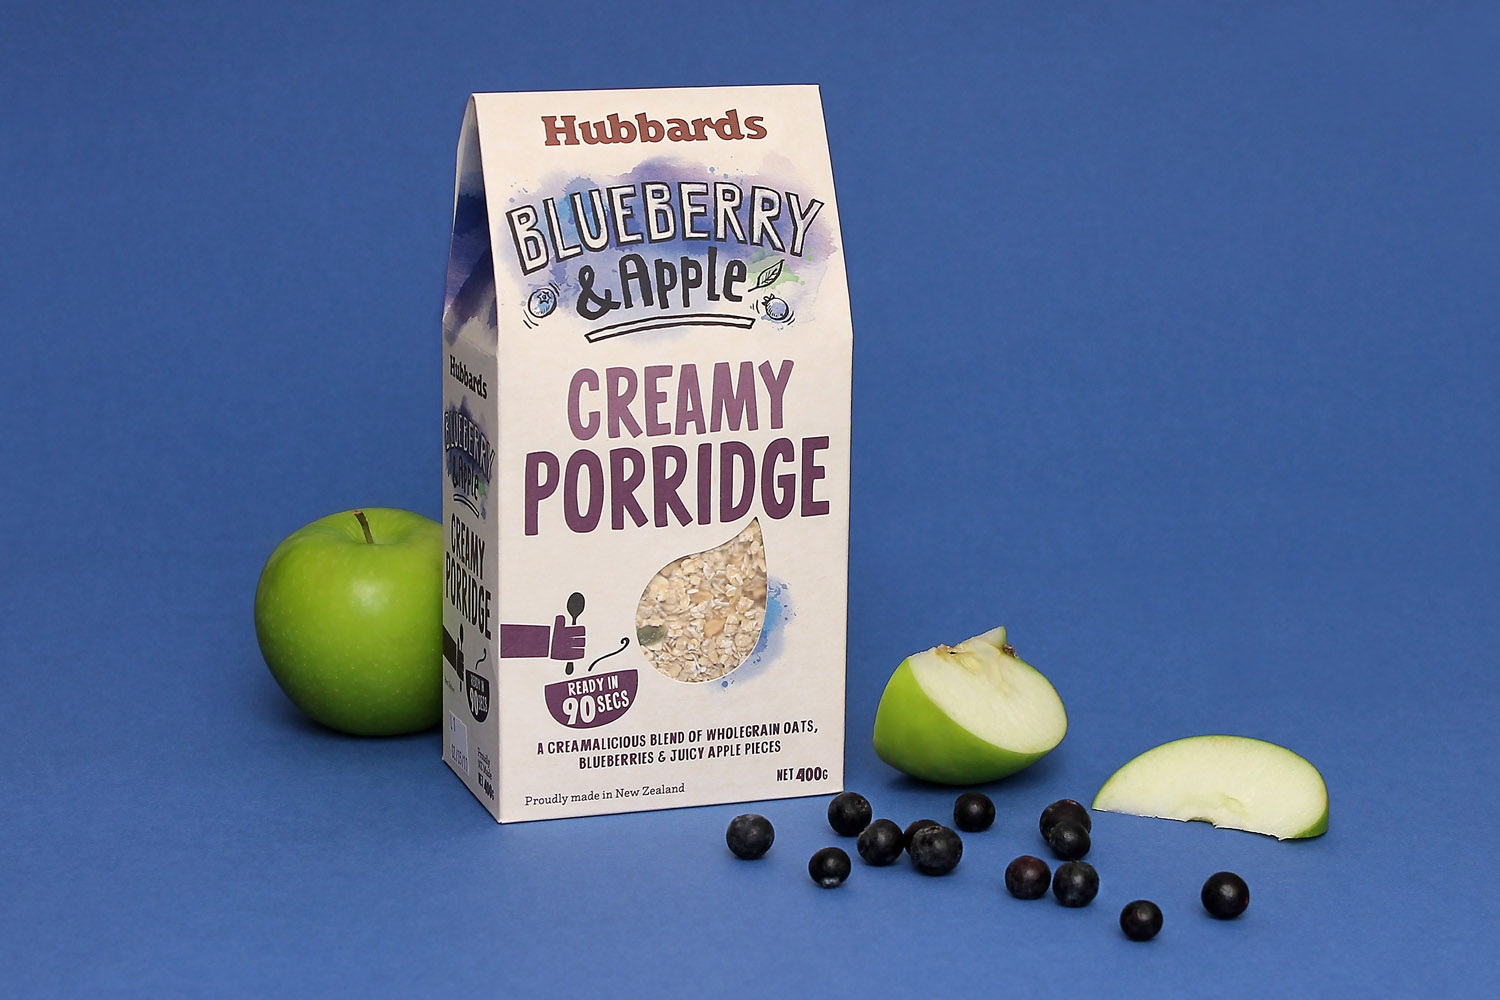 New packaging for Hubbards Porridge designed by Coats, New Zealand